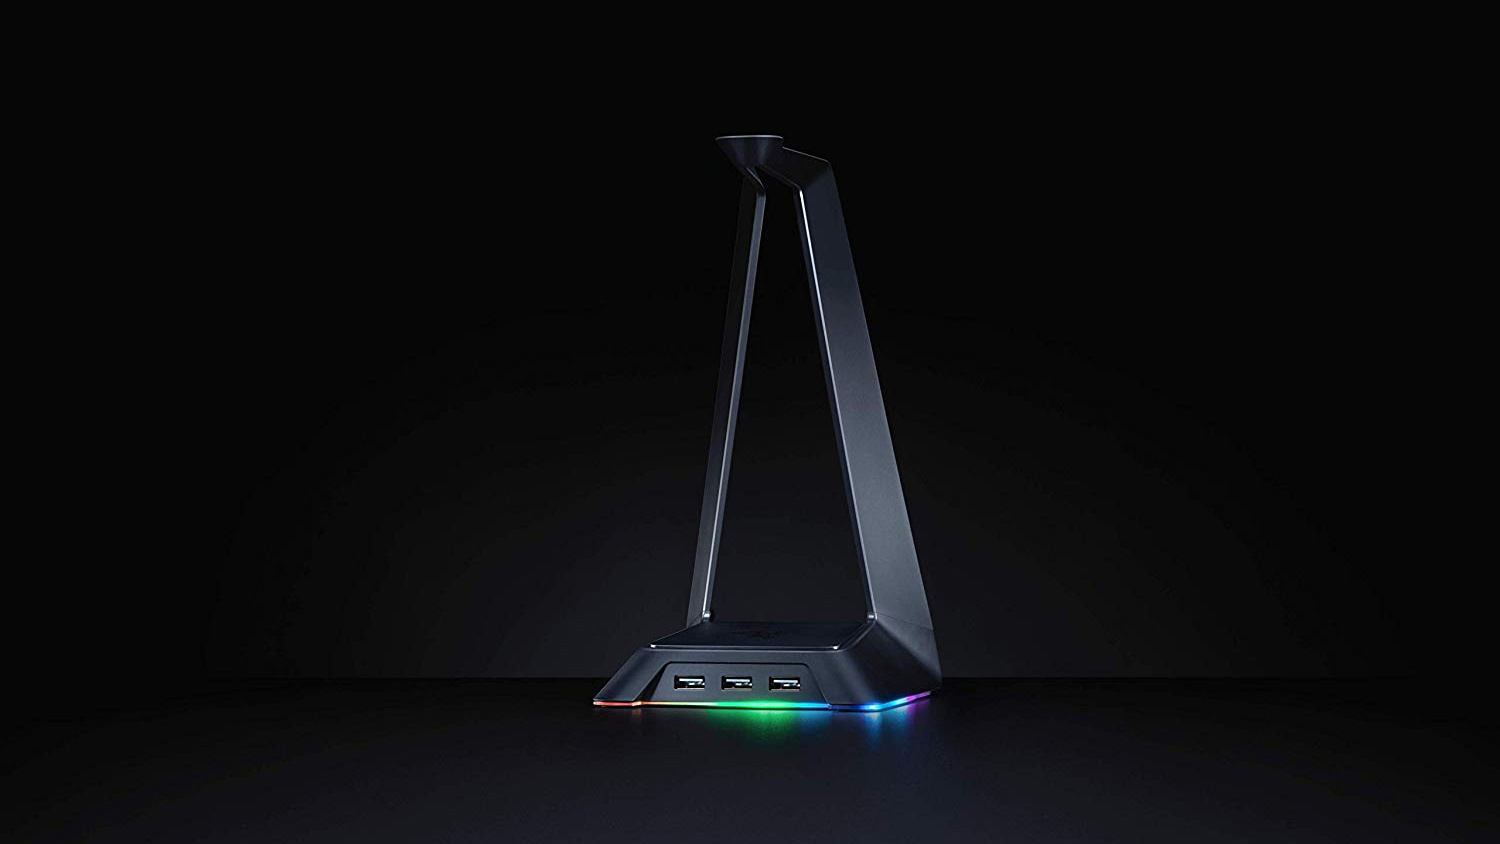 Razer Base Station Chroma from the front